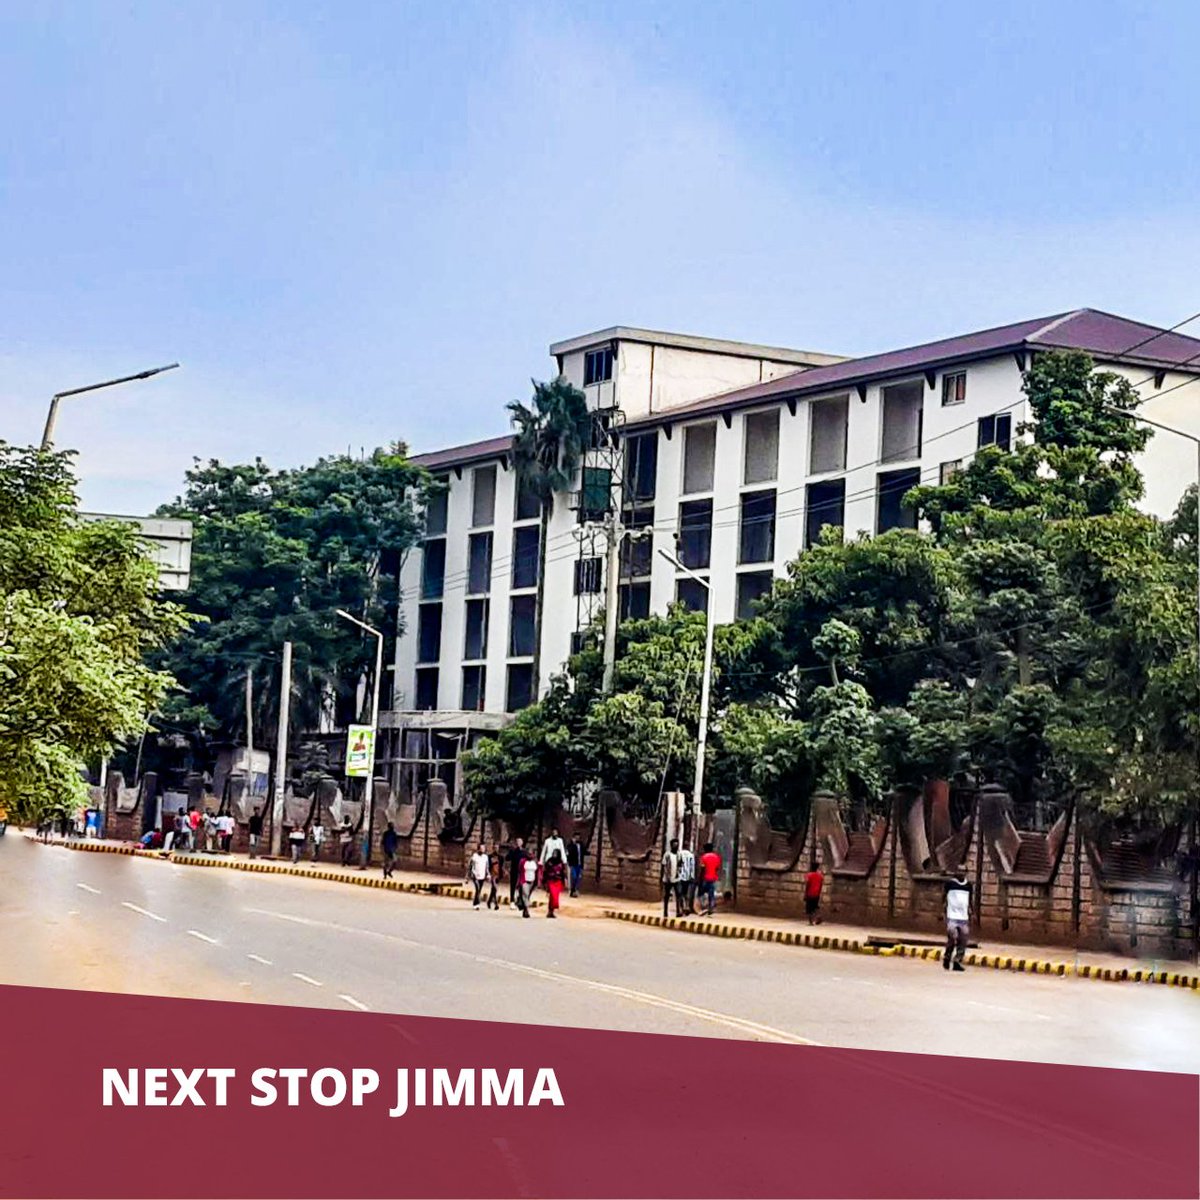 We’re continuously opening new hotels & resorts across Ethiopia to ensure that you have the right place to stay on your travels. Next destination … 𝐉𝐢𝐦𝐦𝐚! #jimma #10thdestination #hailehotelsandresorts